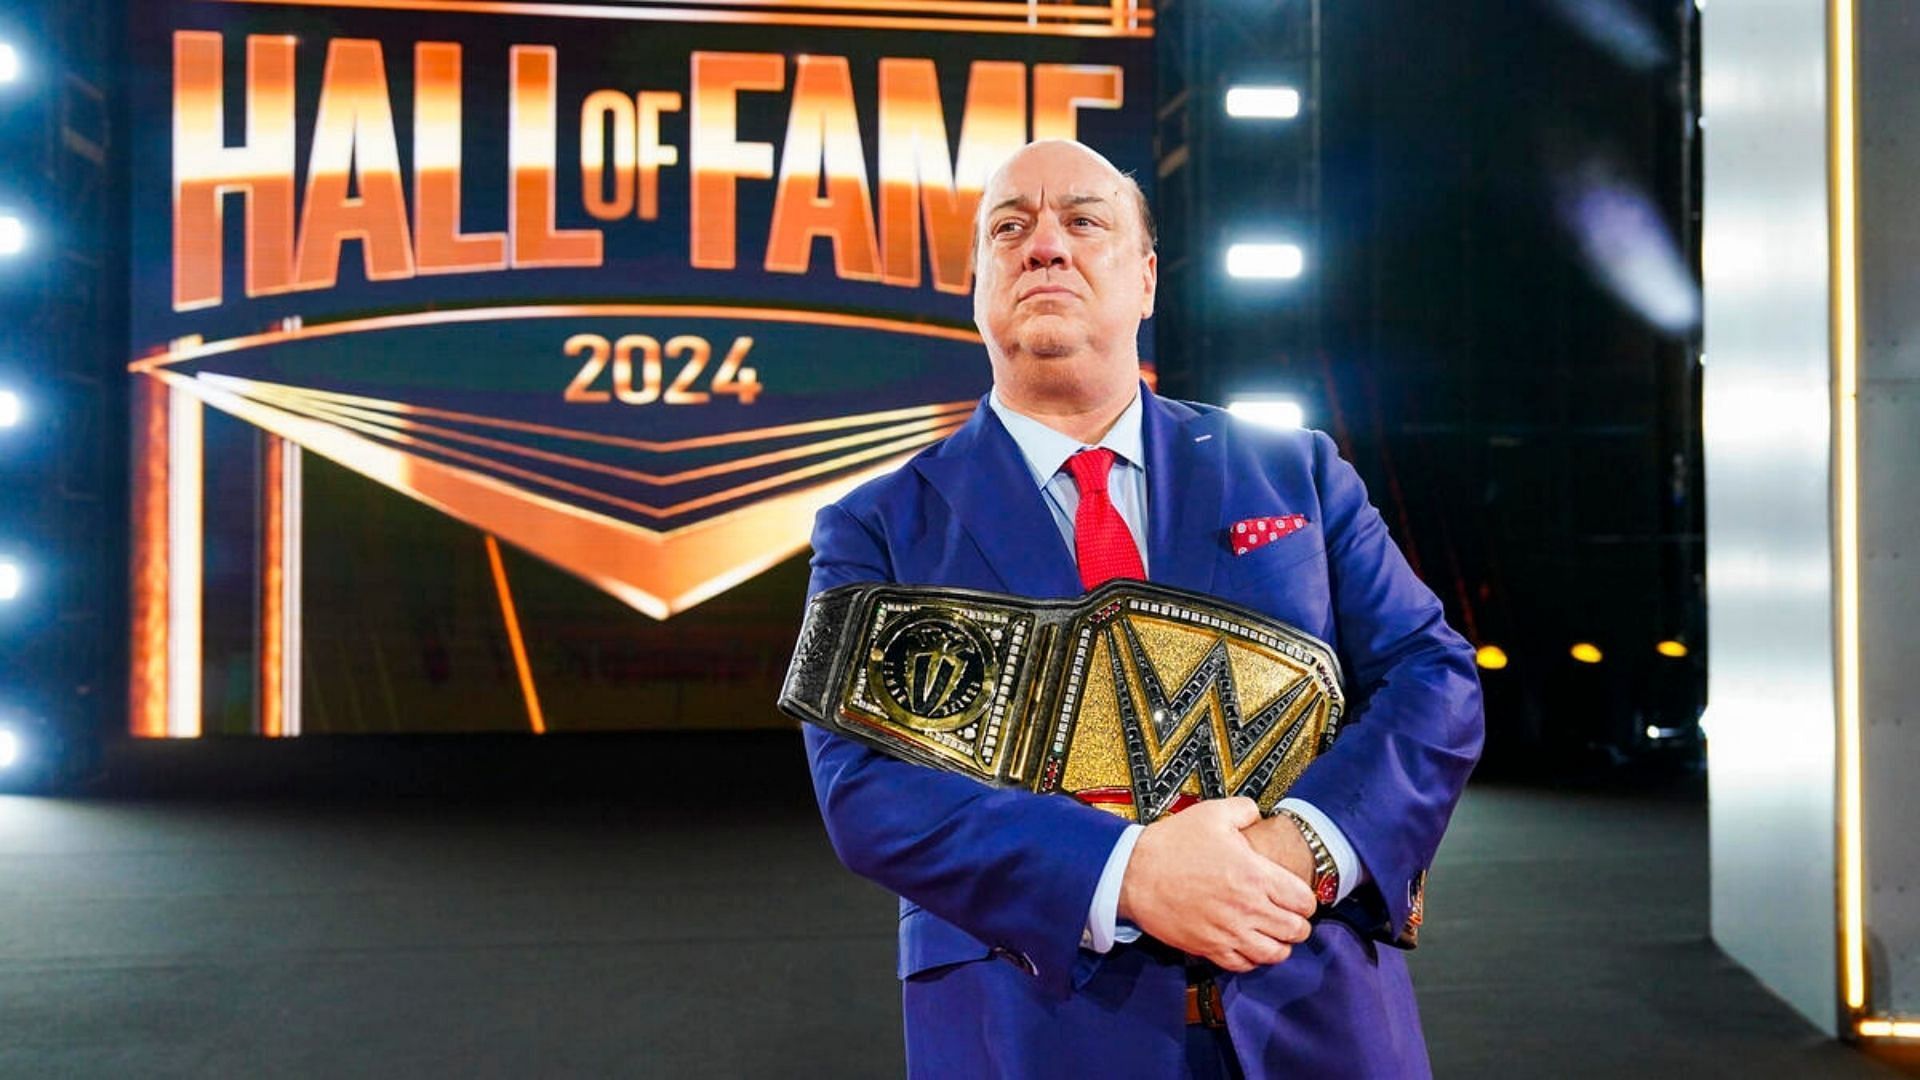 Paul Heyman was part of this year